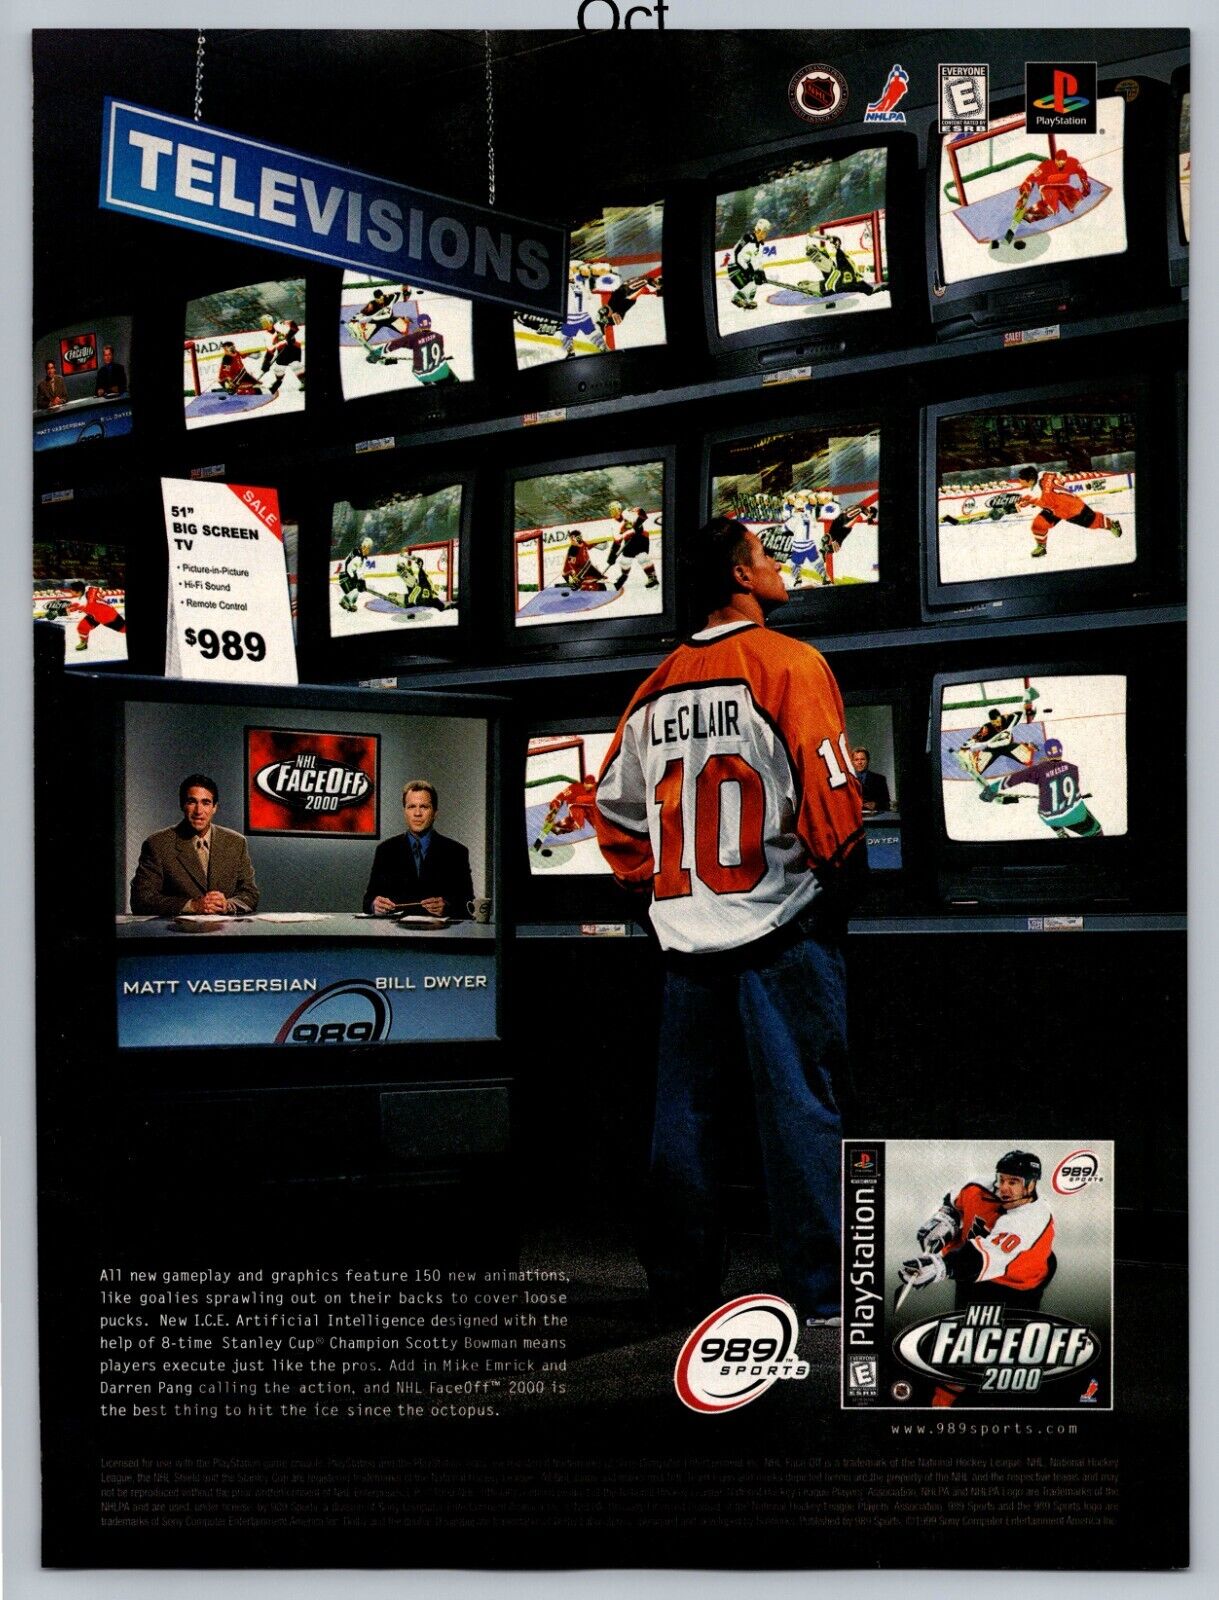 NHL FaceOff 2000 Playstation PS1 Game Promo 1999 Full Page Print Ad